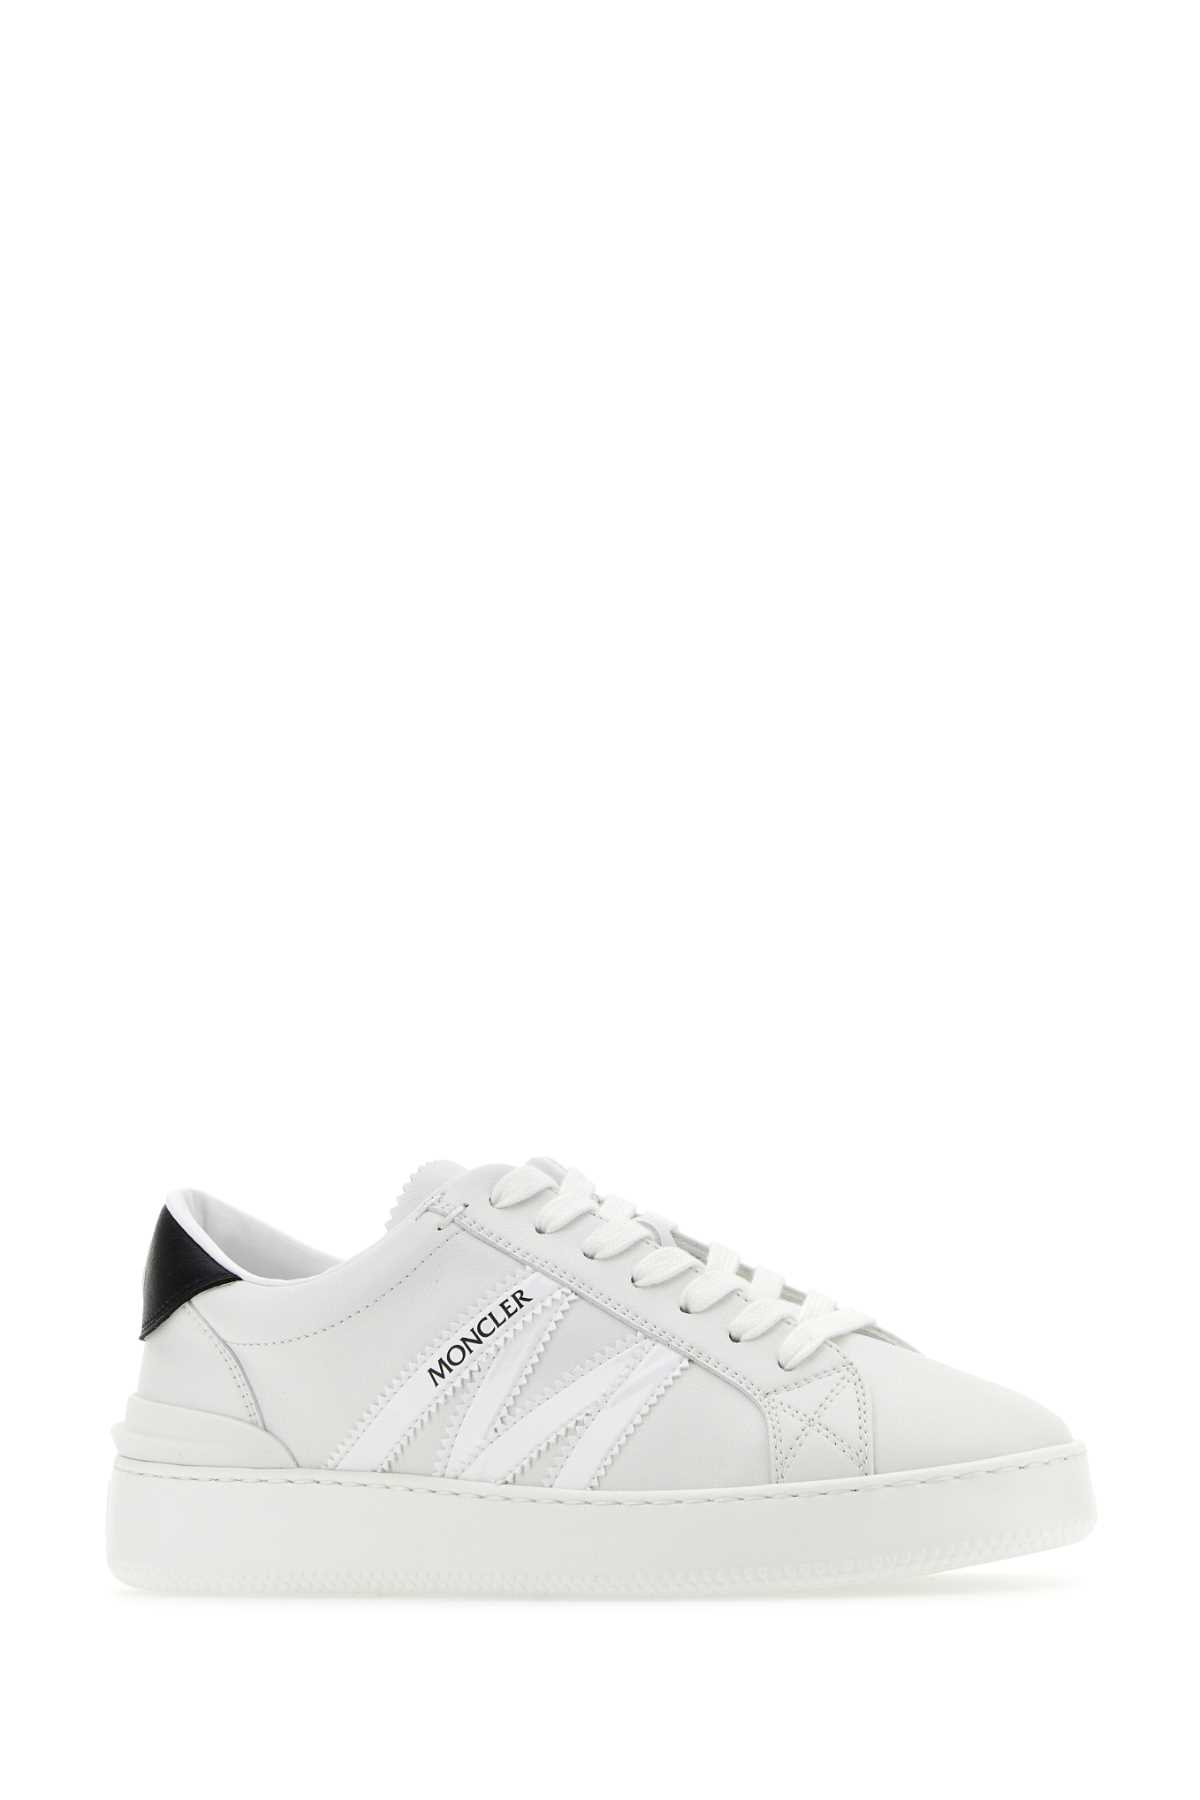 Shop Moncler White Leather Monaco M Sneakers In P09